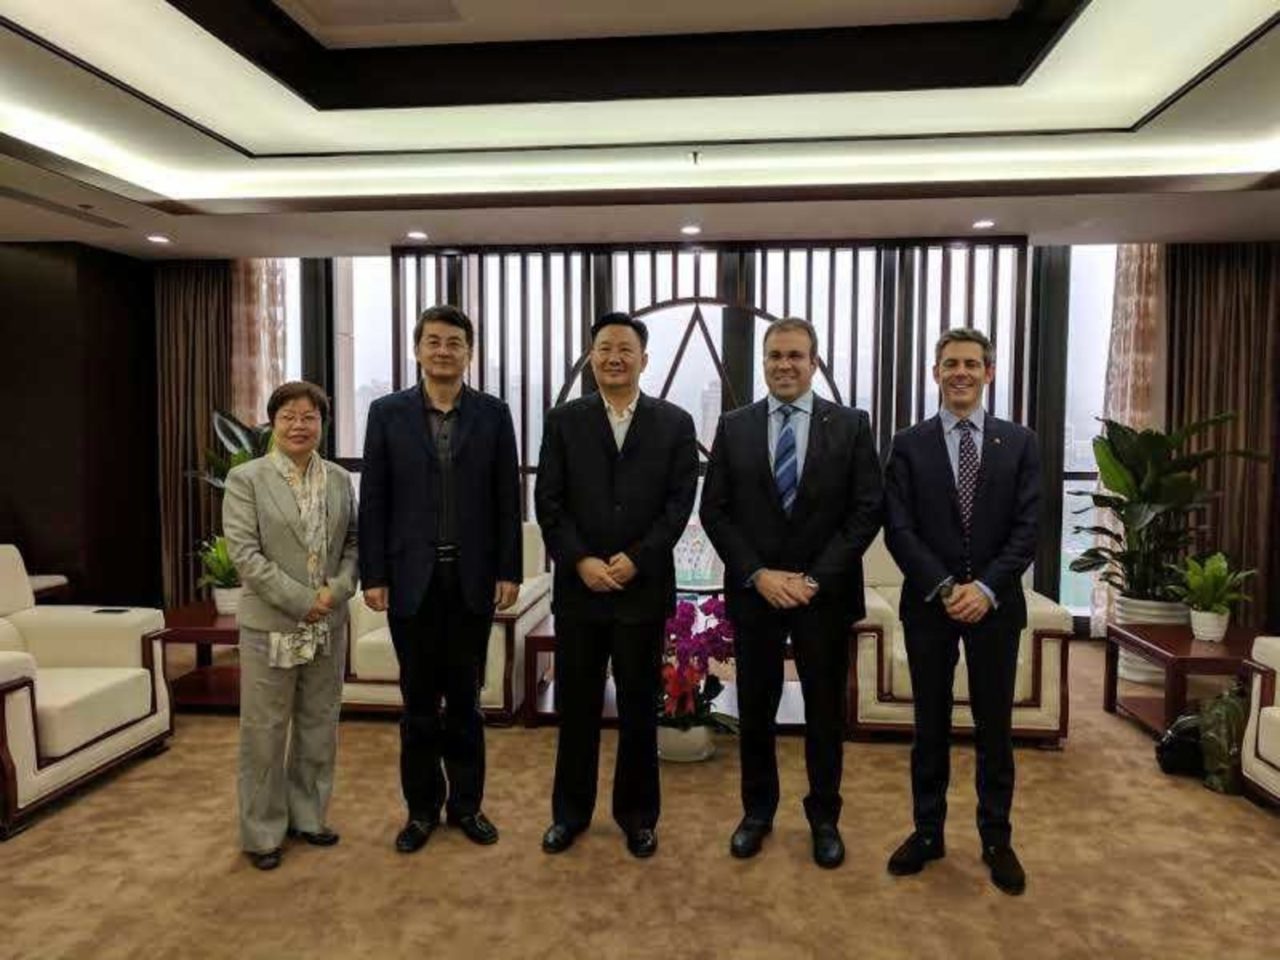 Space View and Deimos Imaging leadership at the China Siwei Headquarters. L-R: Xu Lily, CEO at Space View; Zhao Jun, VP at China Siwei; Xu Wen, President at China Siwei; Fabrizio Pirondini, CEO at Deimos Imaging; Jamie Ritchie, business development director at Deimos Imaging and UrtheCast. Photo: Urthecast.